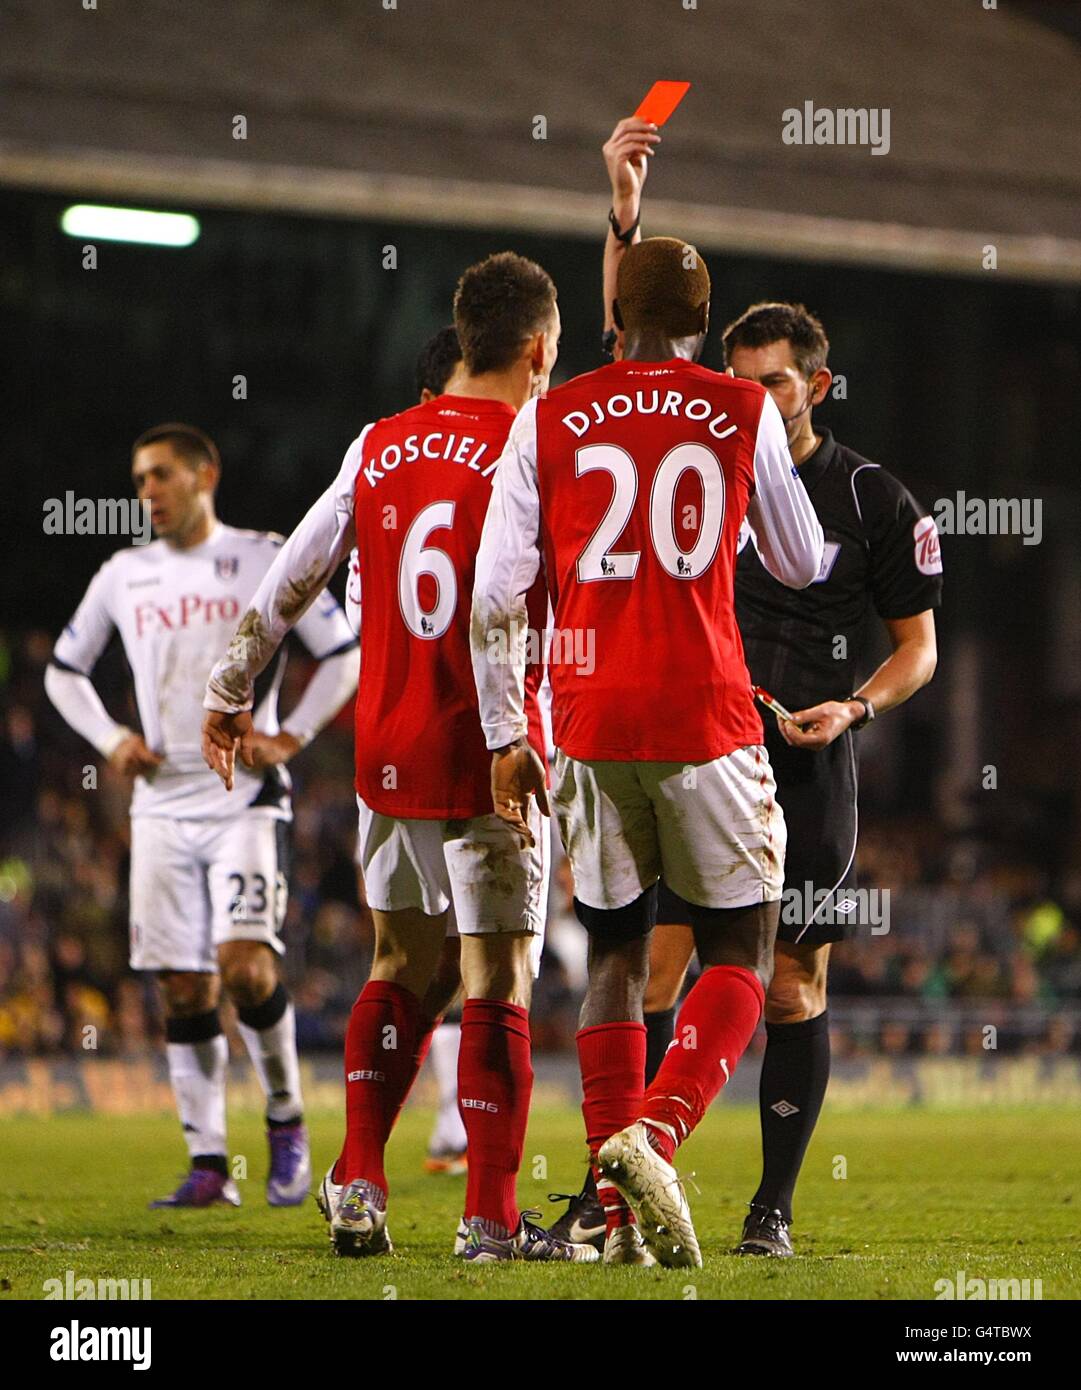 Soccer - Barclays Premier League - Fulham v Arsenal - Craven Cottage. Arsenal's Johan Djourou (20) is shown the red card by referee Lee Probert Stock Photo